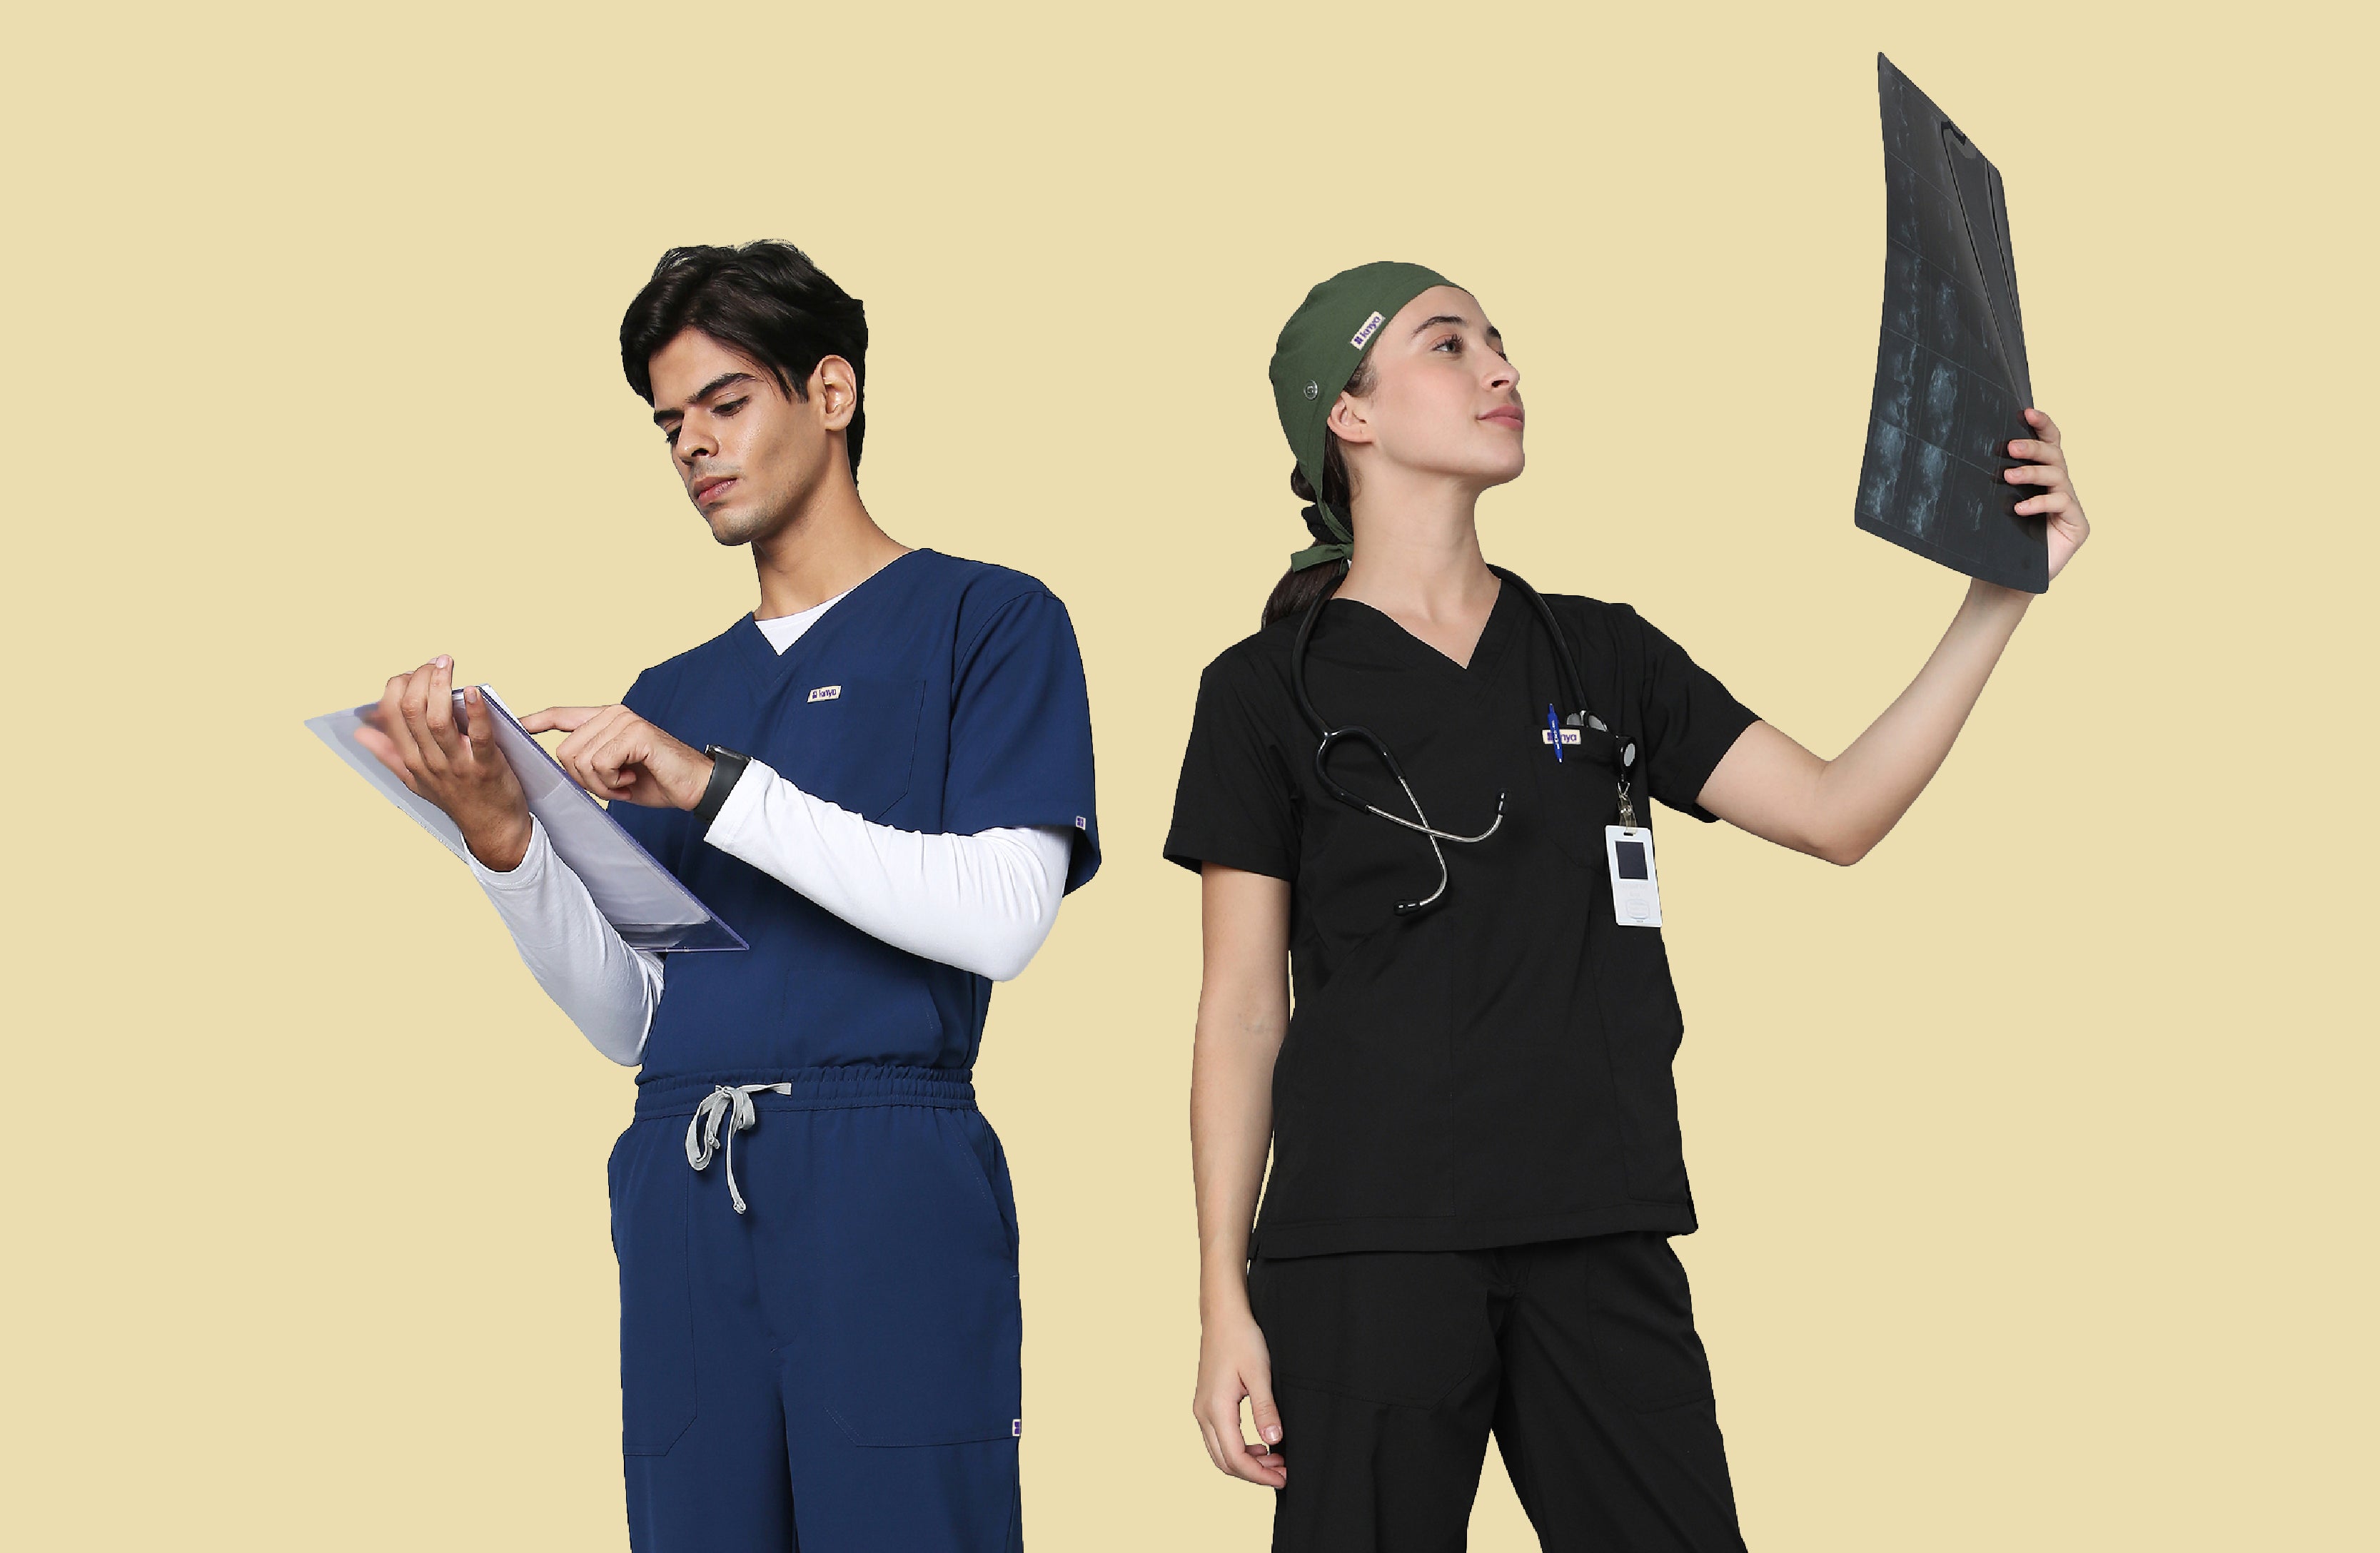 Scrub Suit Uniforms Style: Top 10 Tips for Looking Great – Knya